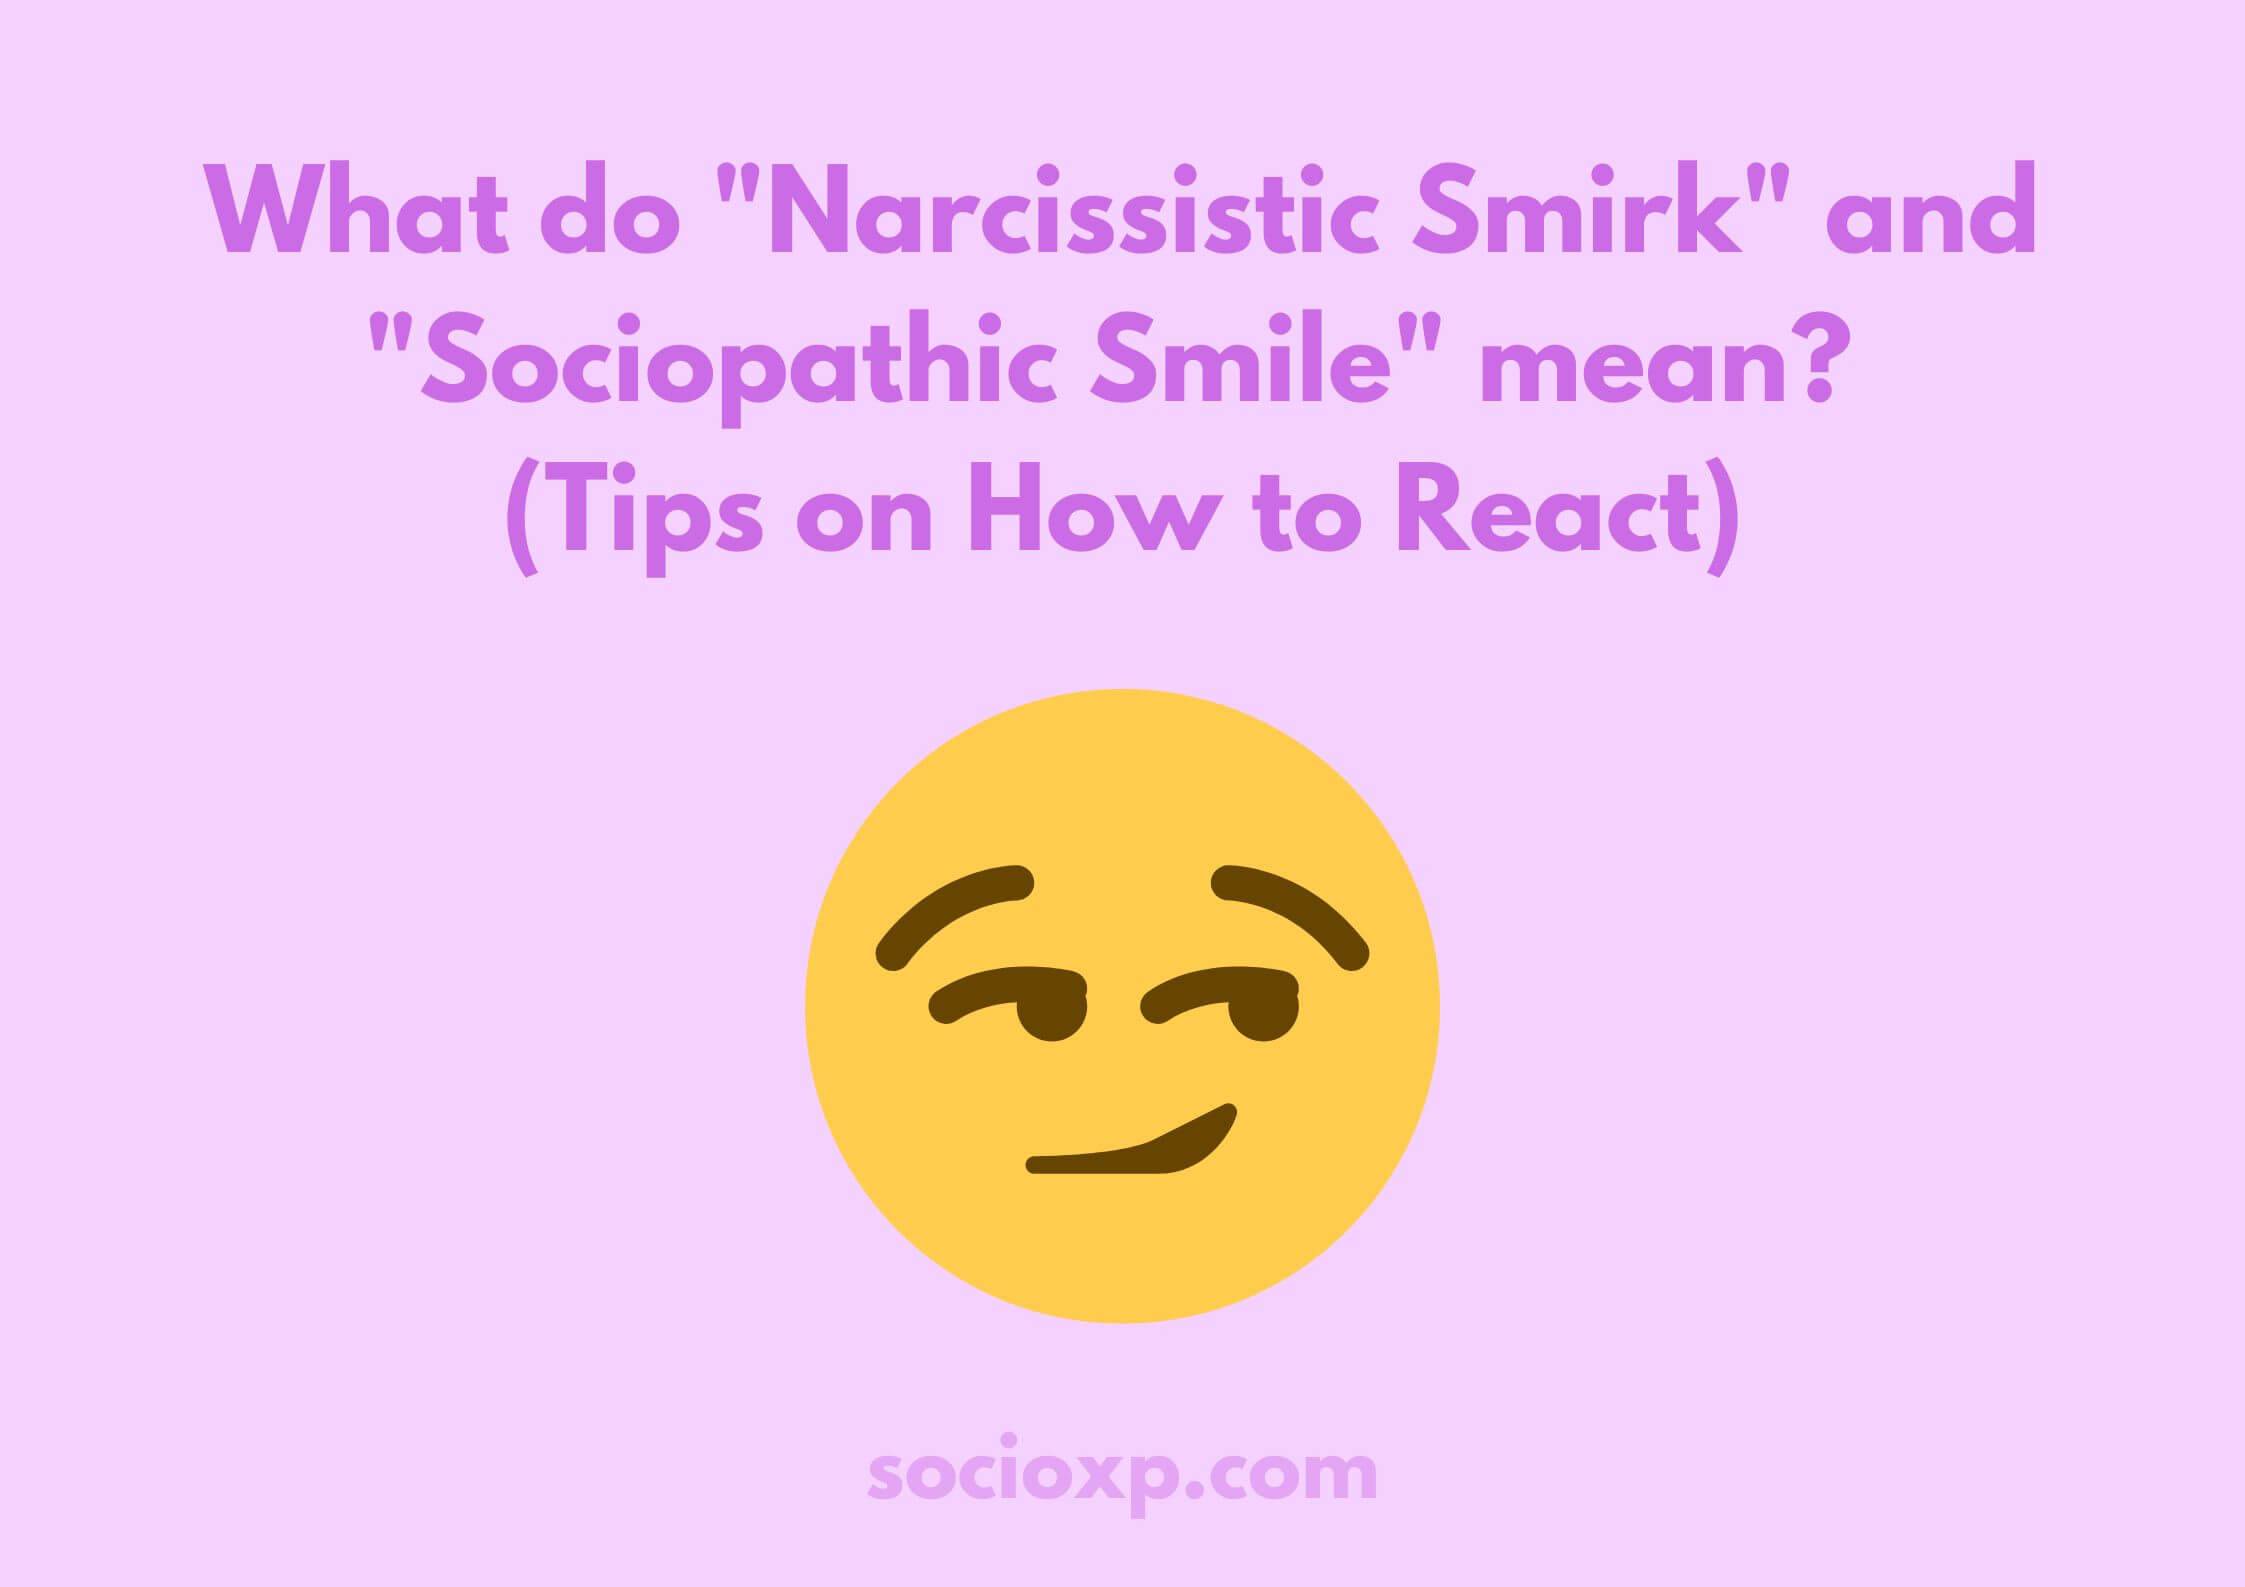 What do Narcissistic Smirk and Sociopathic Smile mean? (Tips on How to React)